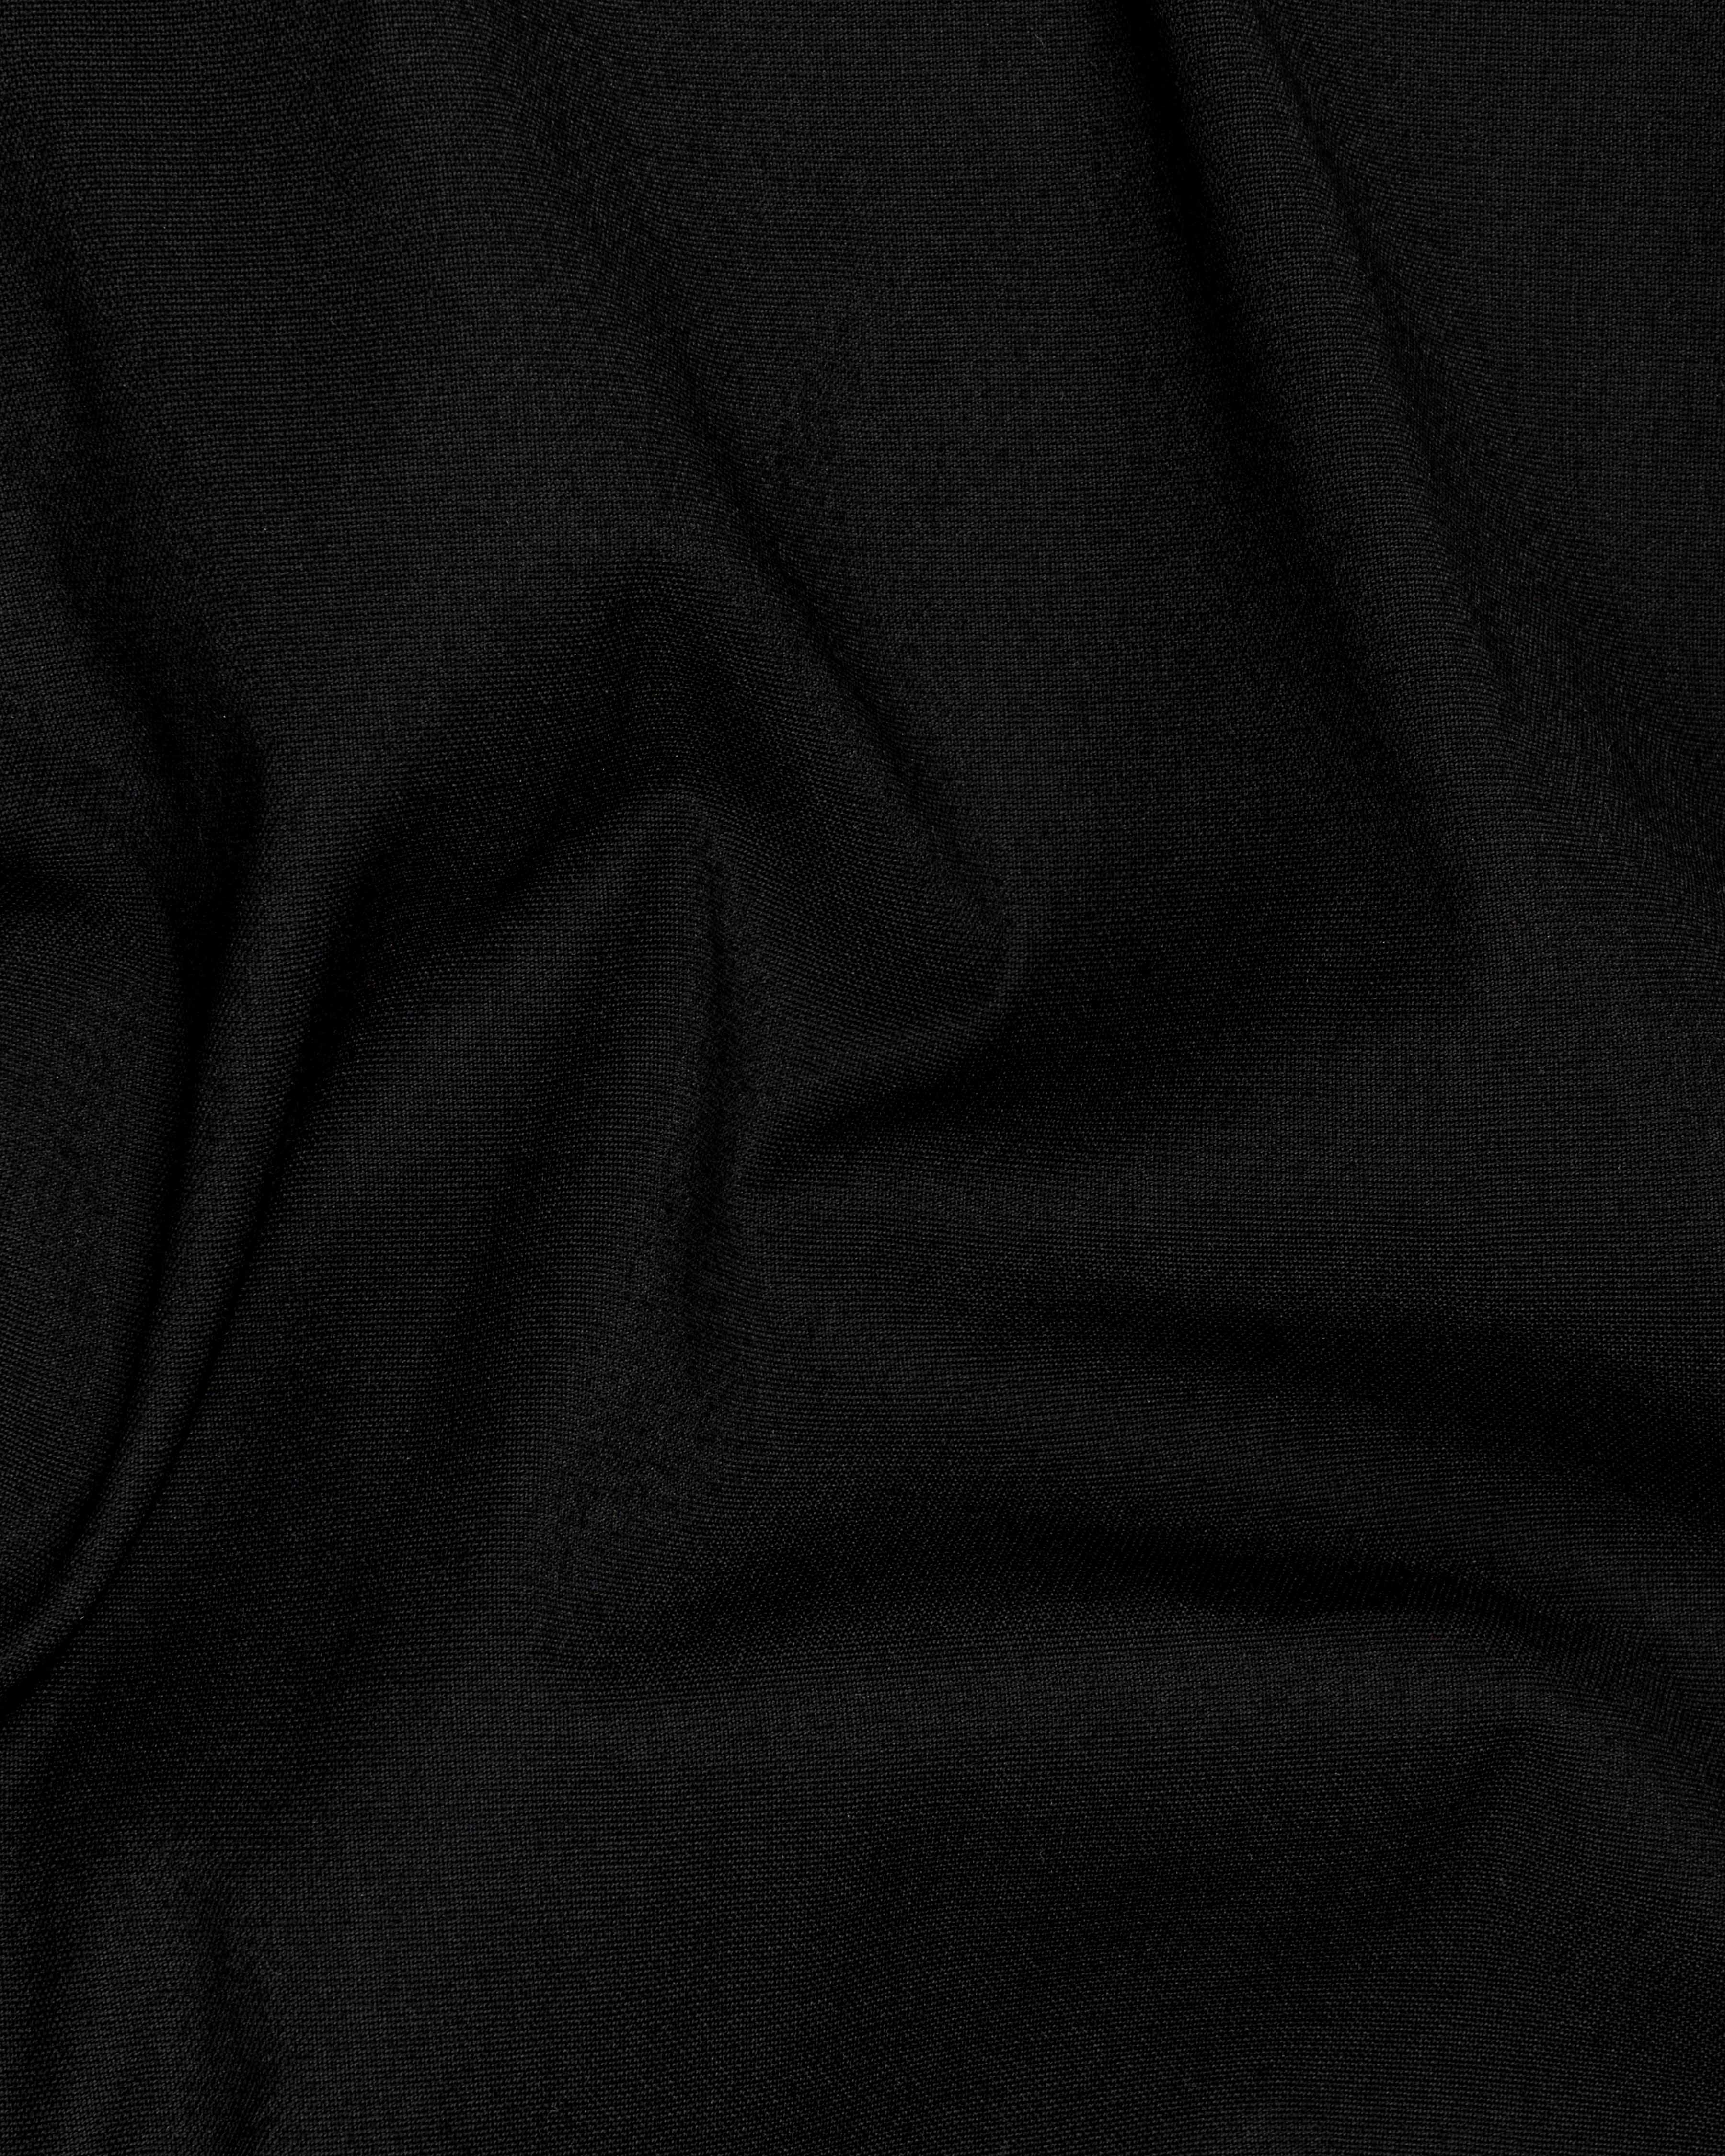 Half Gray and Half Black Wool Rich Double Breasted Blazer BL1236-DB-36, BL1236-DB-38, BL1236-DB-40, BL1236-DB-42, BL1236-DB-44, BL1236-DB-46, BL1236-DB-48, BL1236-DB-50, BL1236-DB-52, BL1236-DB-54, BL1236-DB-56, BL1236-DB-58, BL1236-DB-60